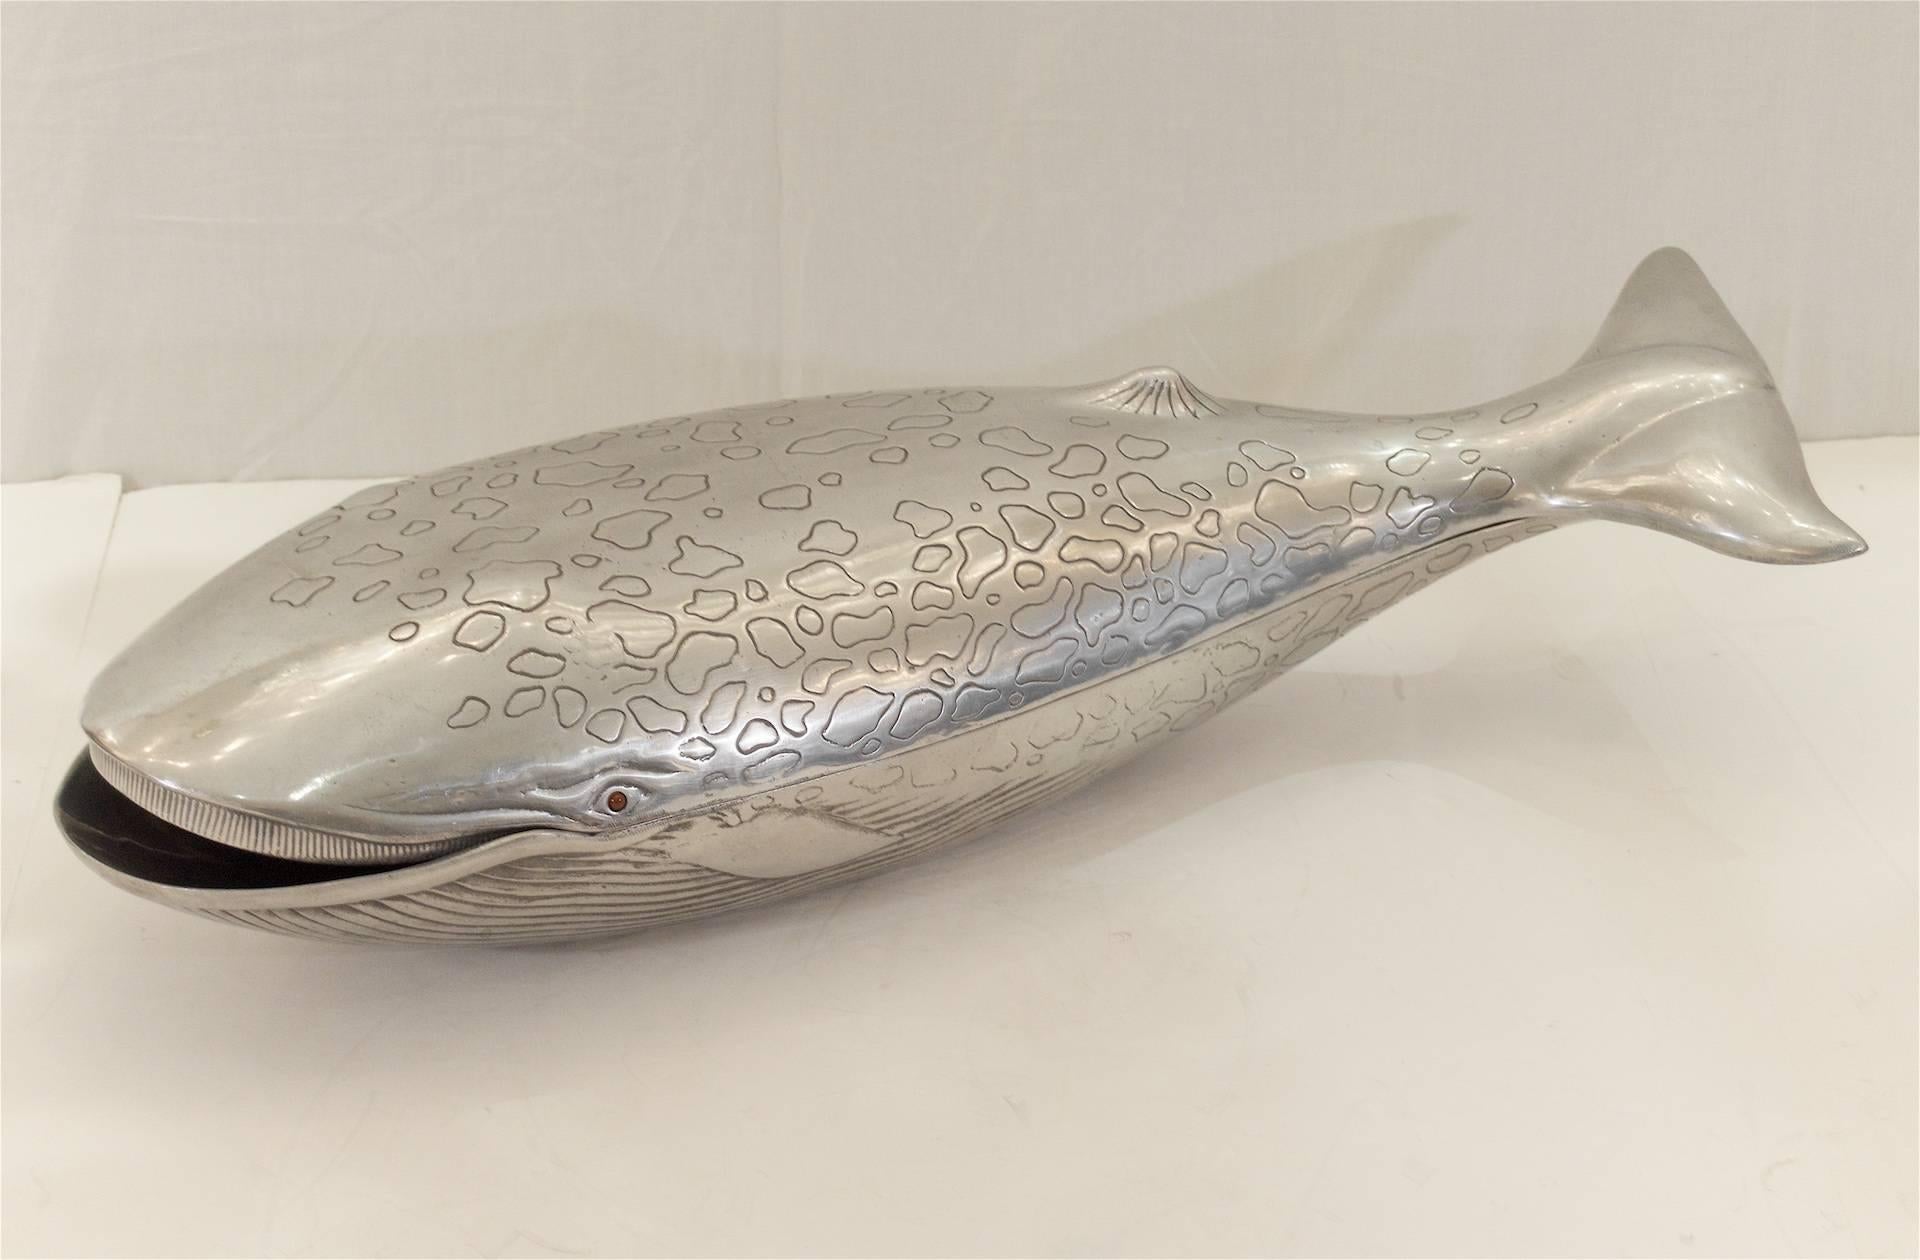 Unusual decorative aluminium centrepiece in the form of a whale, with ruby-toned eyes. Lid comes off for storage or display.